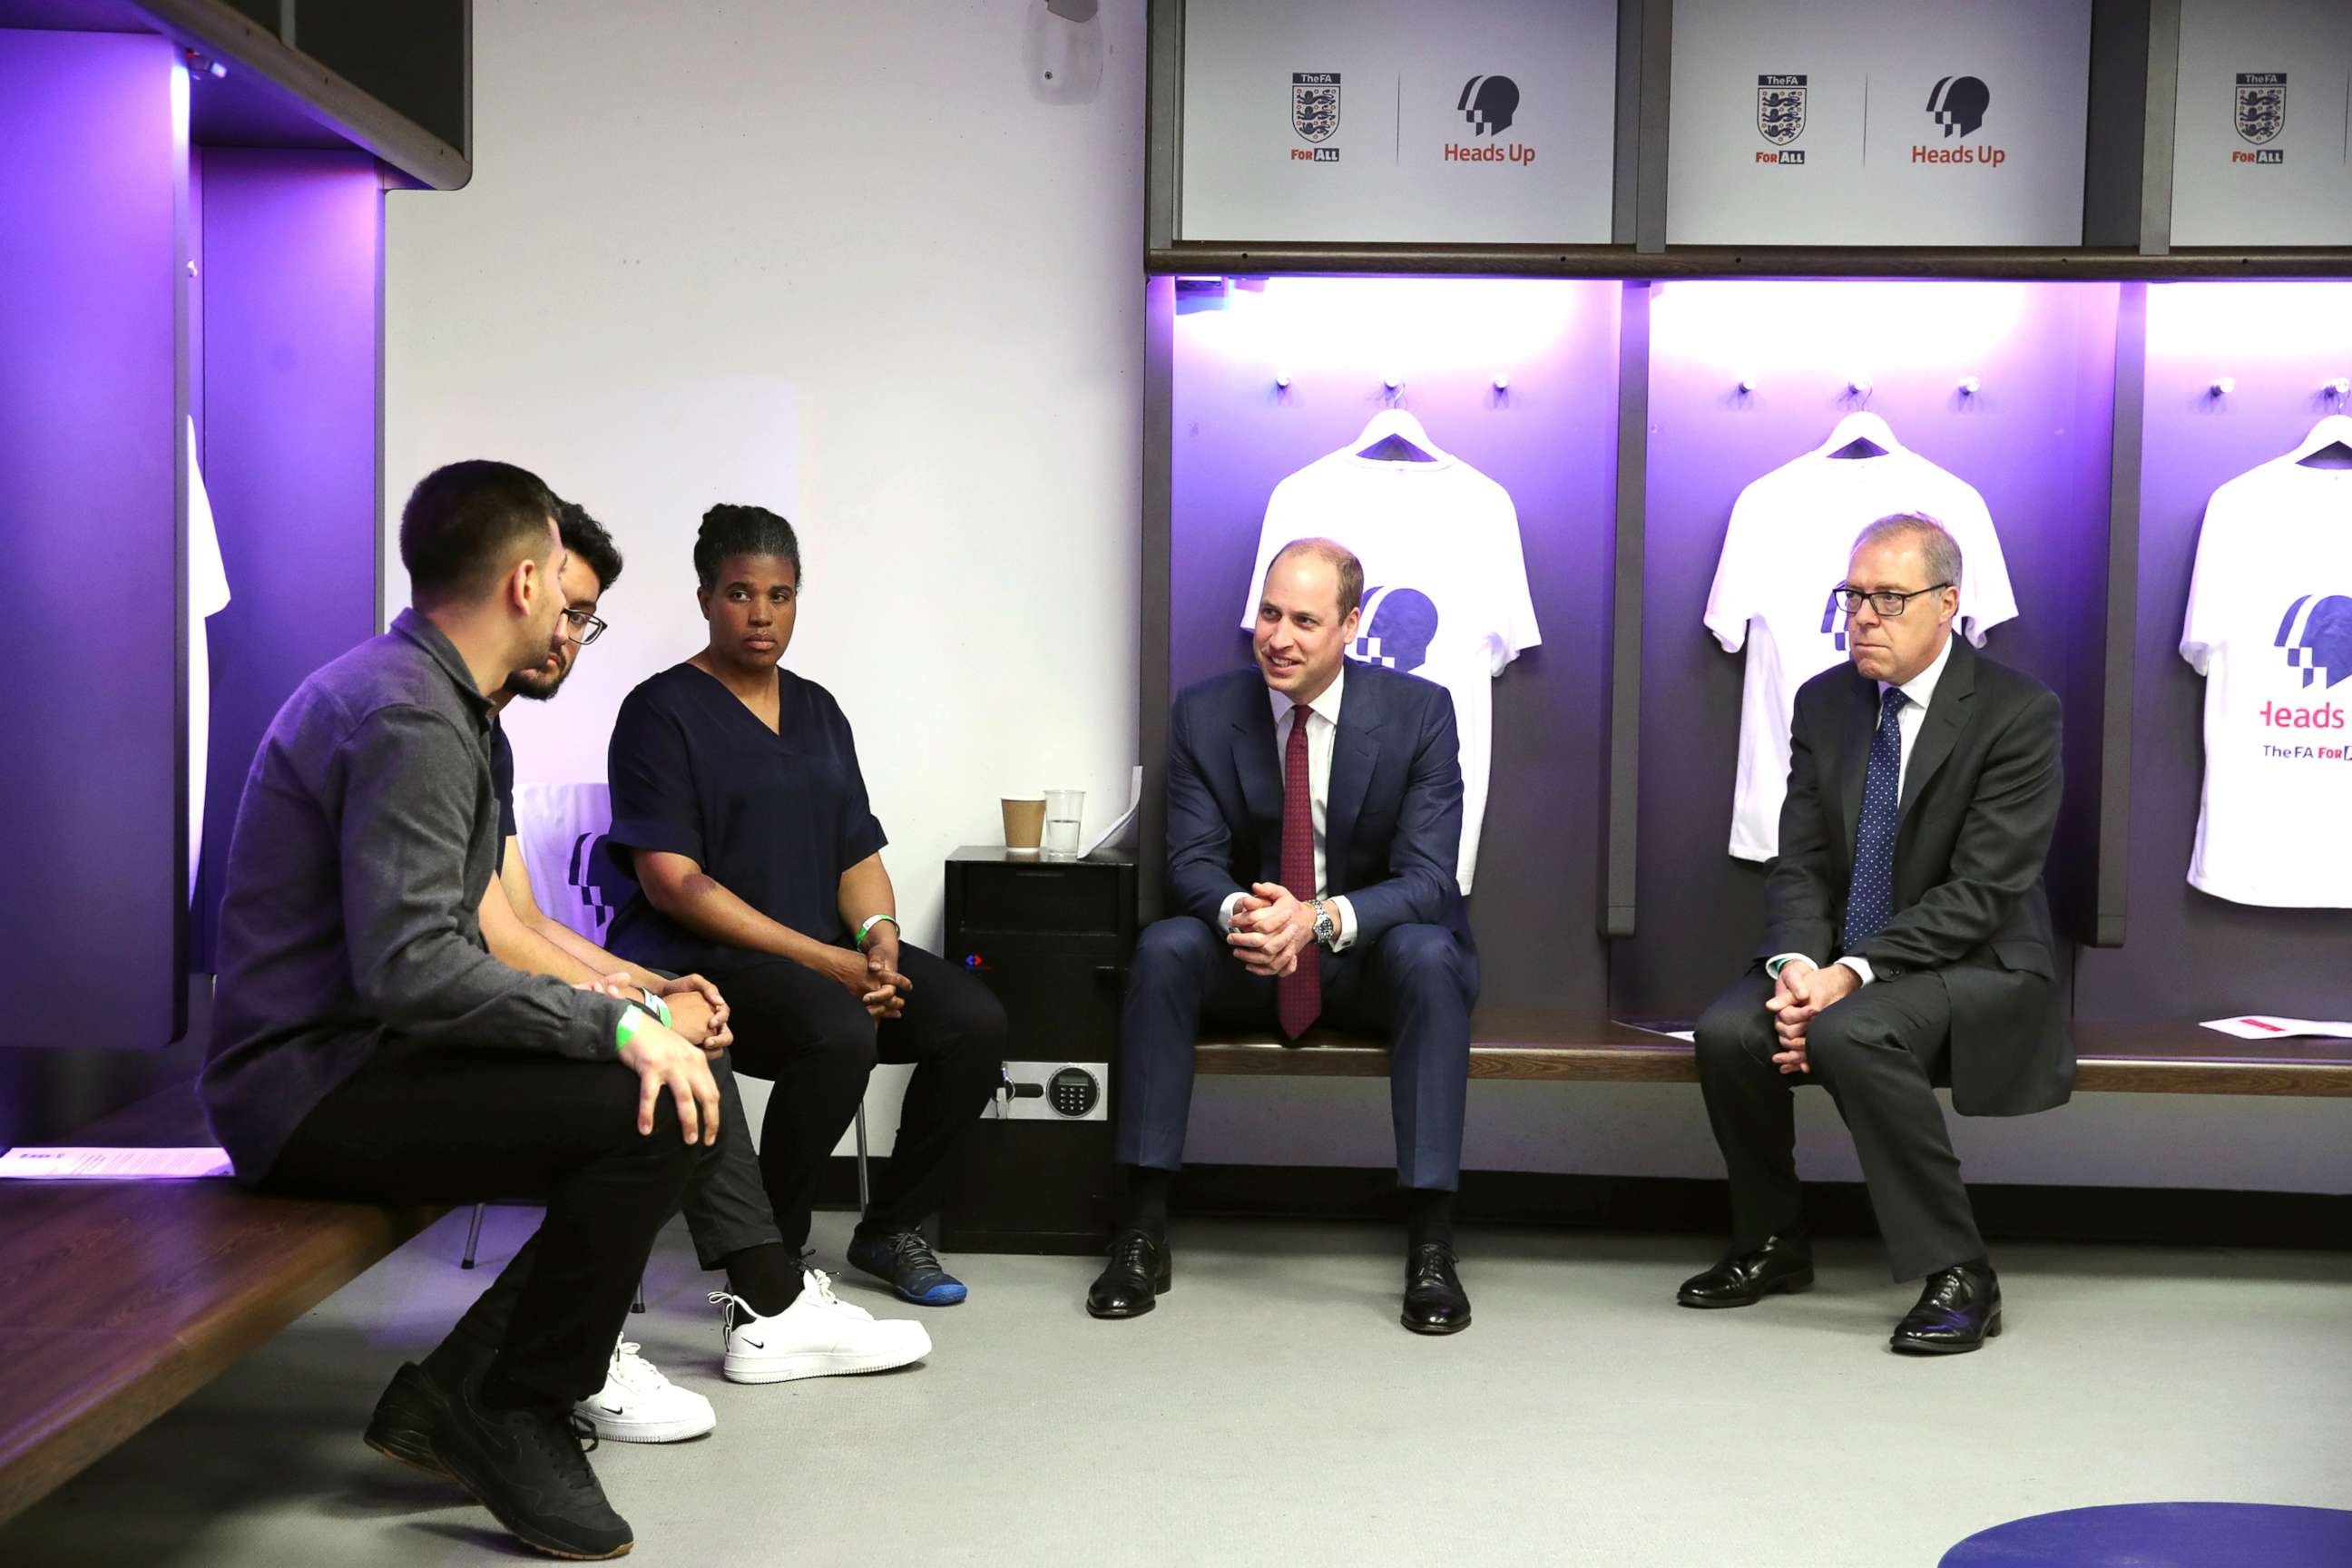 PHOTO: Britain's Prince William, Duke of Cambridge (second right) speaks with stakeholders from the grassroots of football as he attends the launch of a new mental health campaign at Wembley Stadium in London on May 15, 2019.